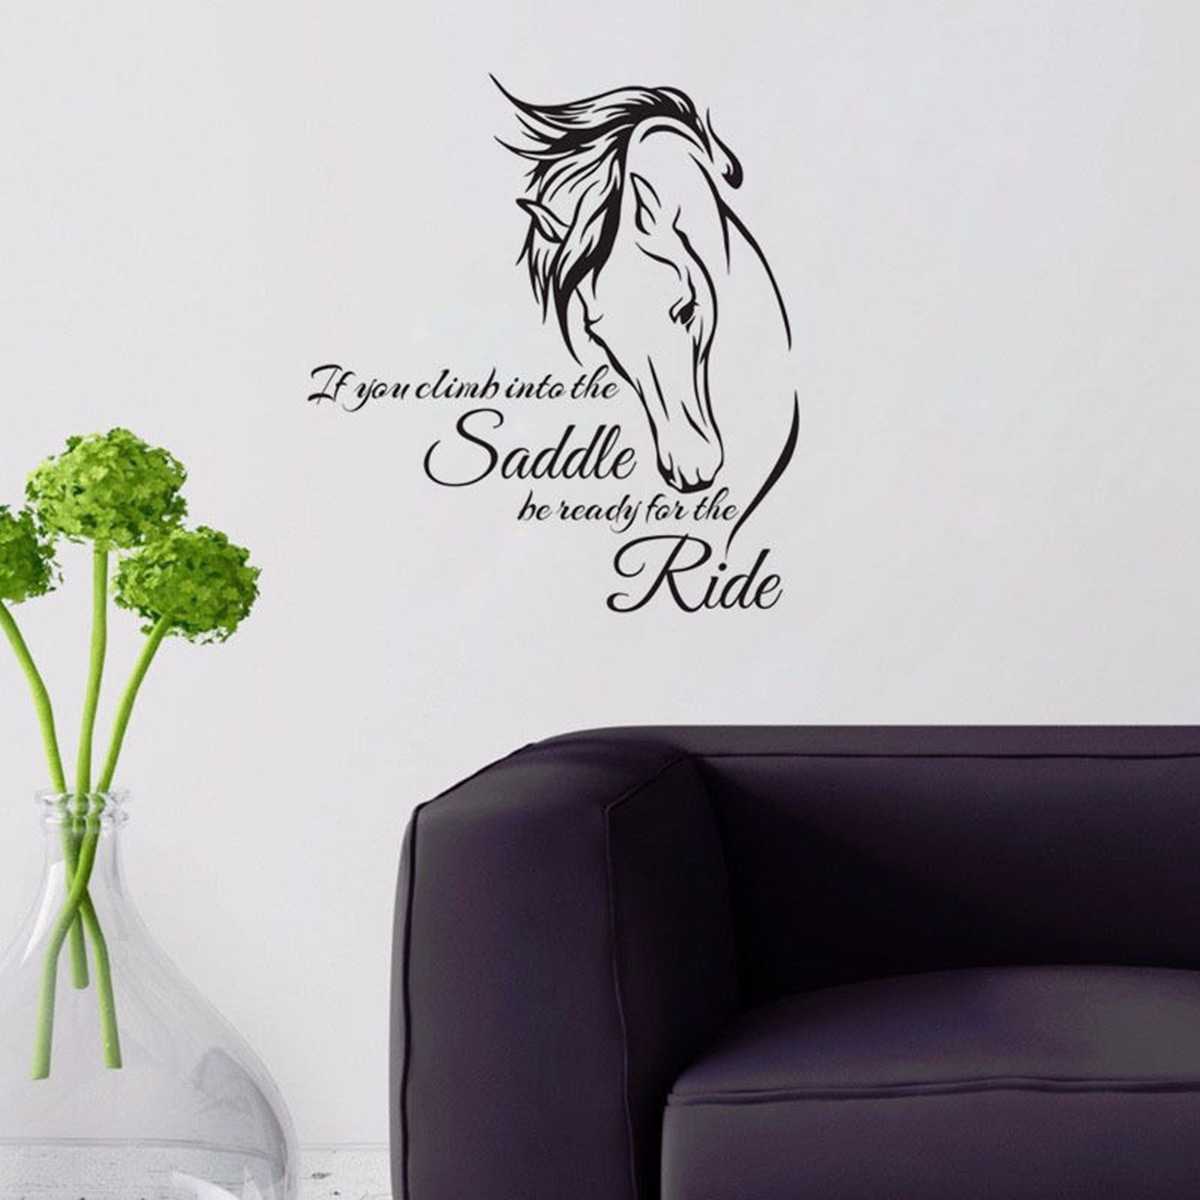 Horse-Stickers-Wall-Decal-Saddle-Ride-Living-Room-Wall-Home-Decorations-1577588